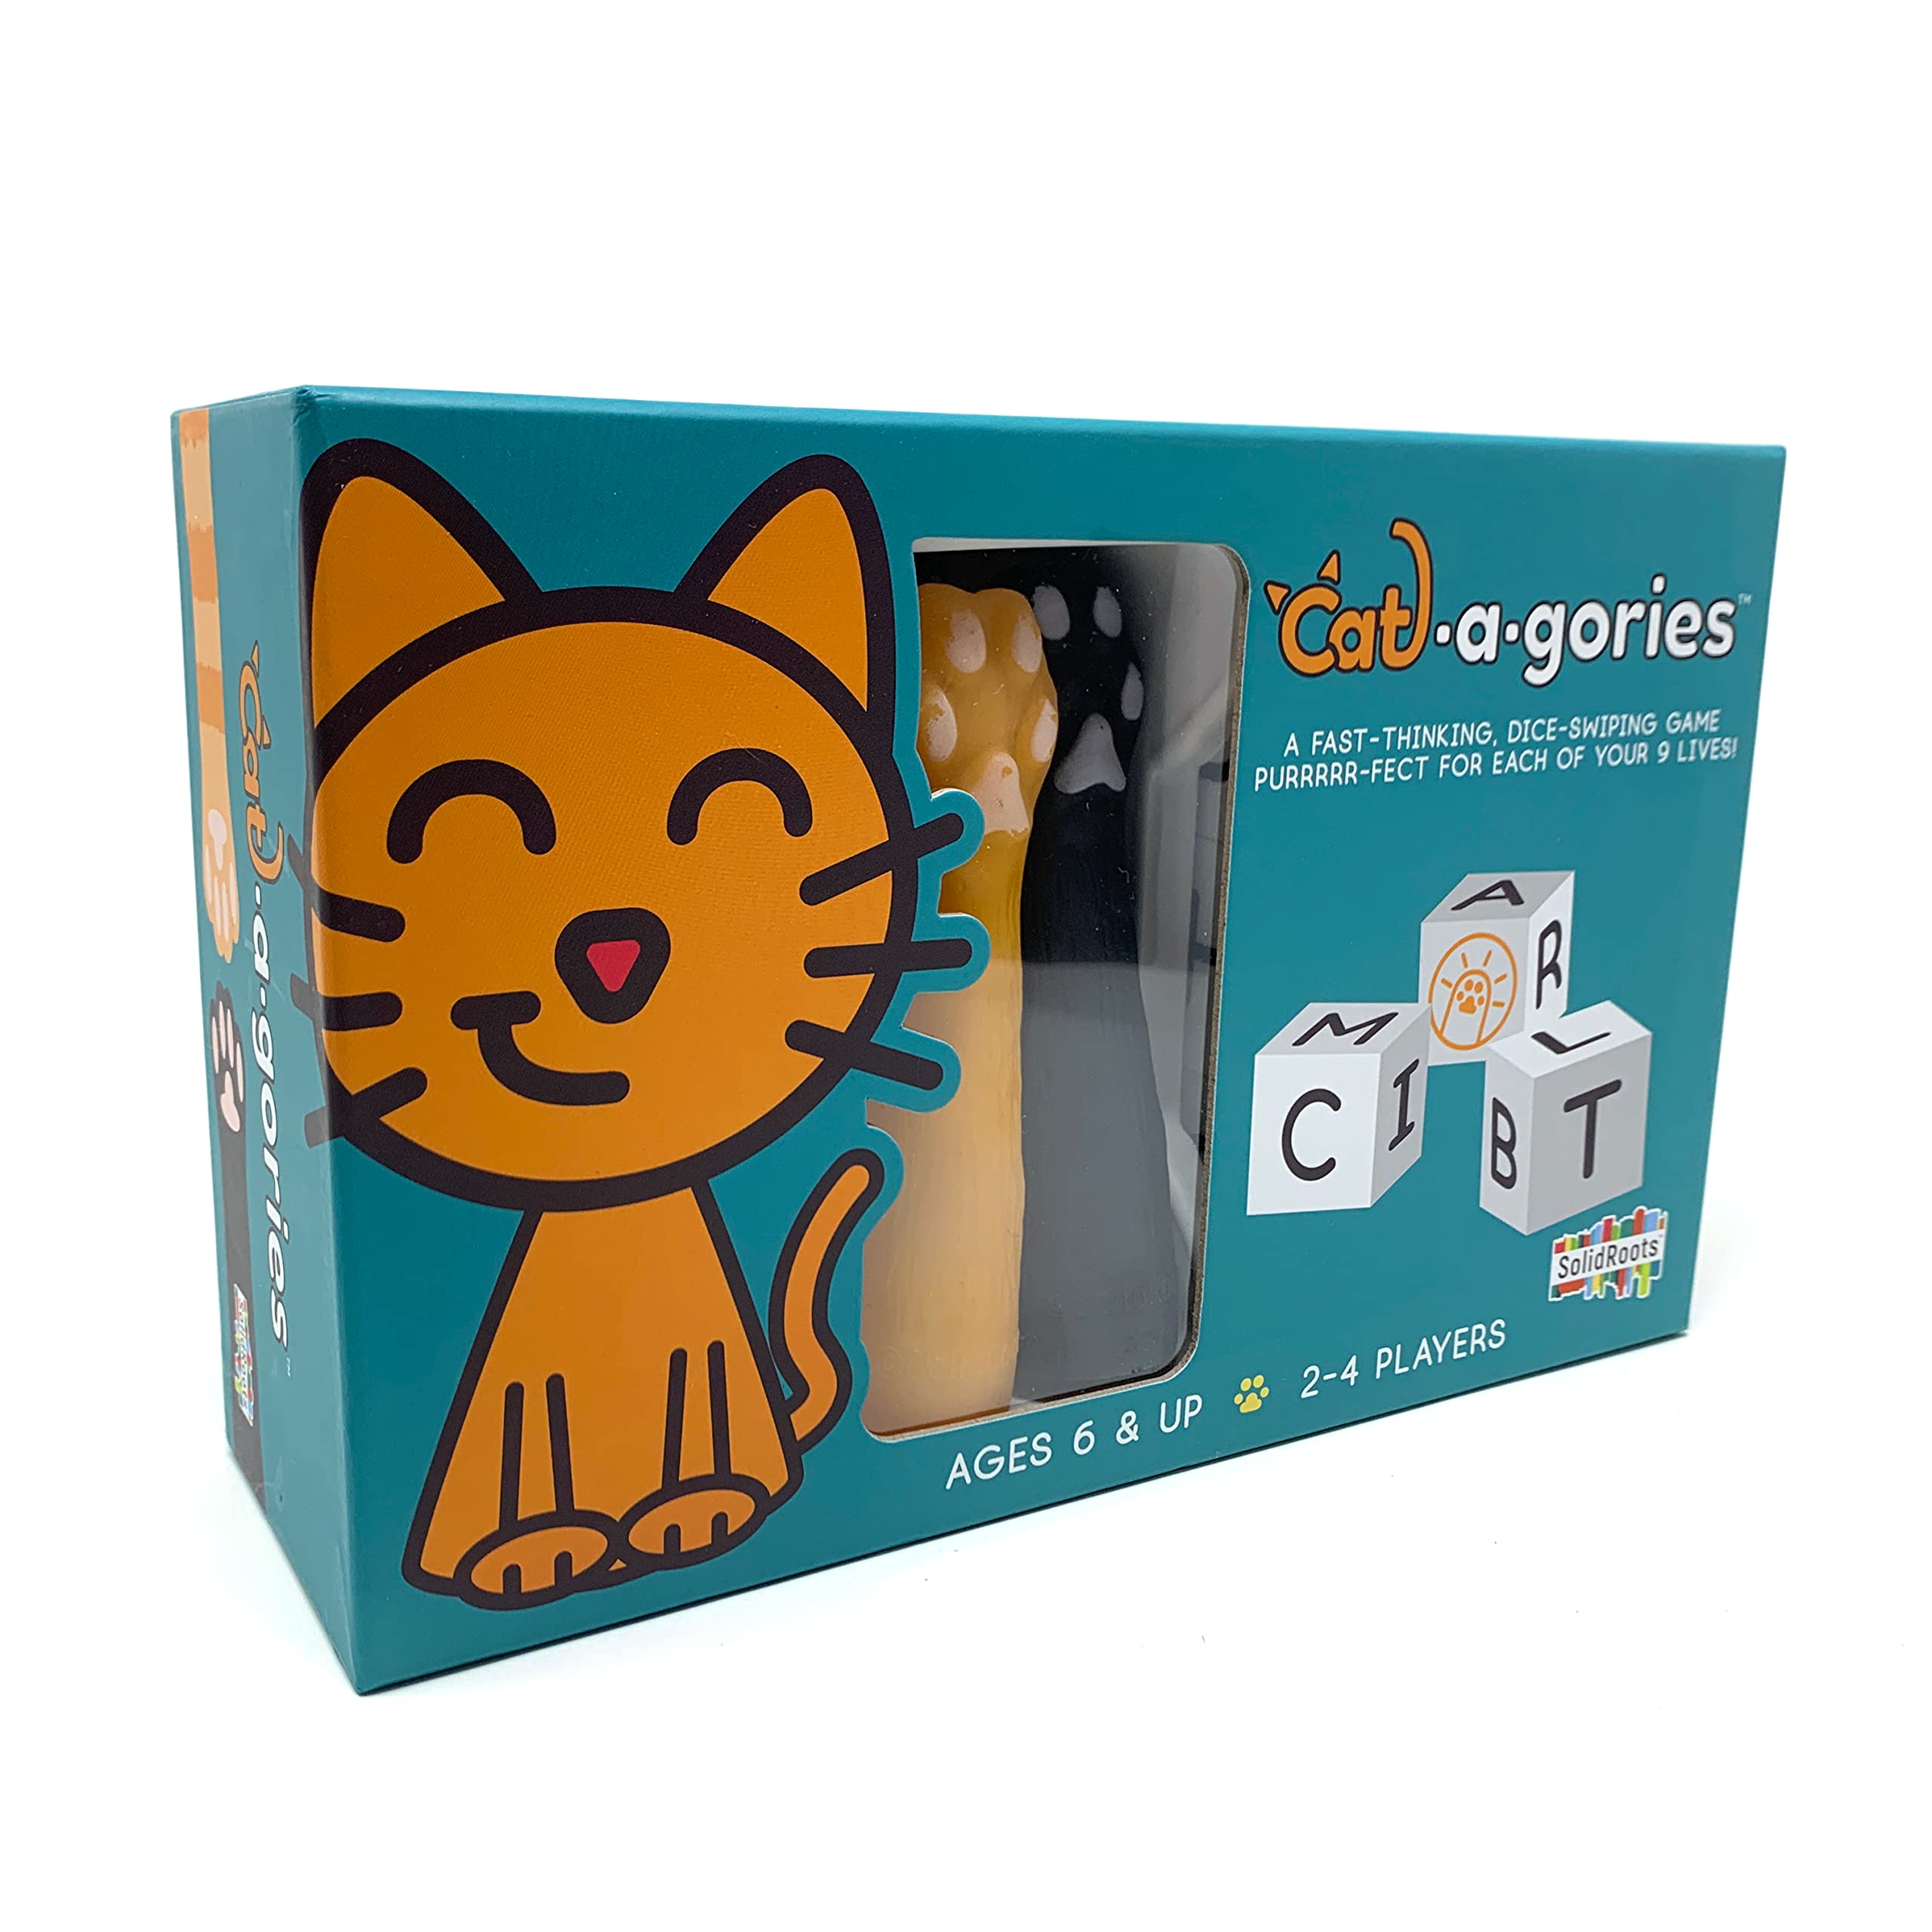 SolidRoots Cat•a•gories - Fast Thinking, Dice-Swapping Game